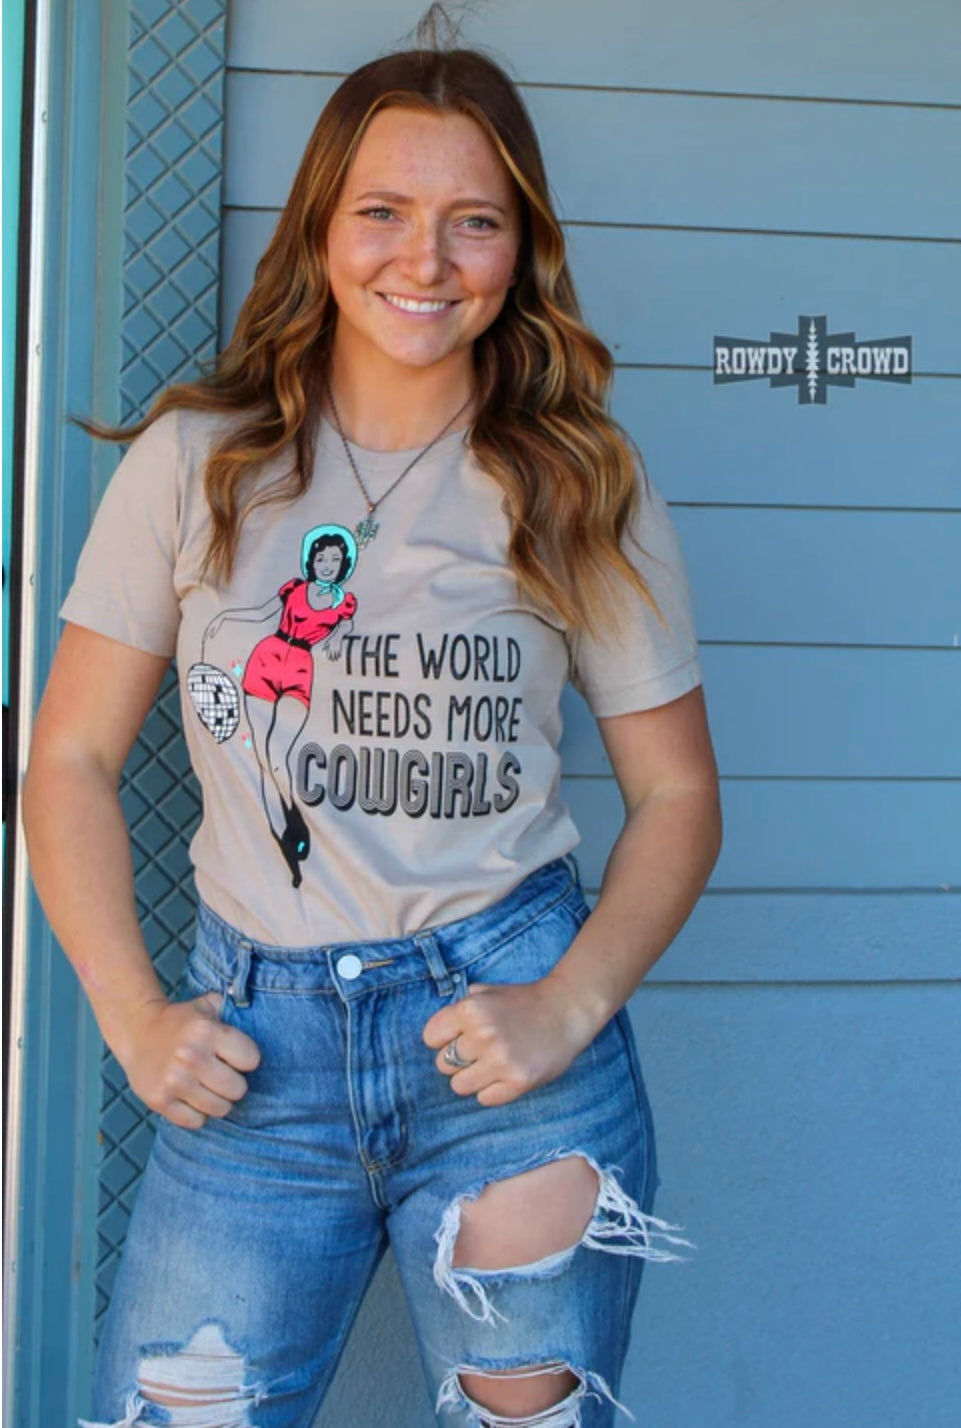 The More Cowgirl Tee